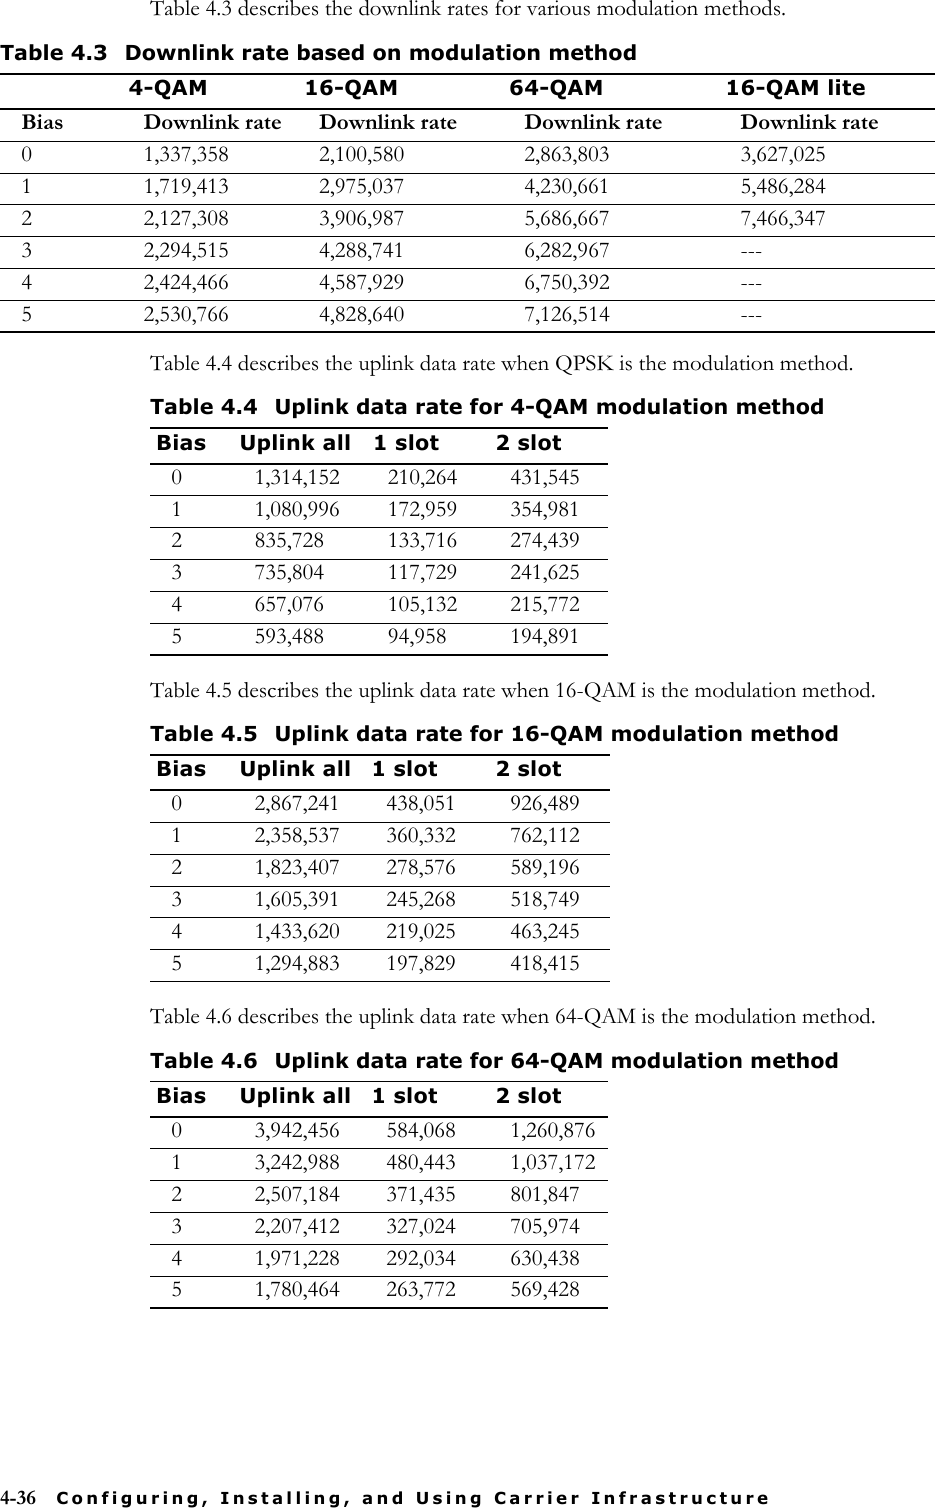 4-36 Configuring, Installing, and Using Carrier InfrastructureTable 4.3 describes the downlink rates for various modulation methods.Table 4.4 describes the uplink data rate when QPSK is the modulation method.Table 4.5 describes the uplink data rate when 16-QAM is the modulation method.Table 4.6 describes the uplink data rate when 64-QAM is the modulation method.Table 4.3 Downlink rate based on modulation method4-QAM 16-QAM 64-QAM 16-QAM liteBias Downlink rate Downlink rate Downlink rate Downlink rate0 1,337,358 2,100,580 2,863,803 3,627,0251 1,719,413 2,975,037 4,230,661 5,486,2842 2,127,308 3,906,987 5,686,667 7,466,3473 2,294,515 4,288,741 6,282,967 ---4 2,424,466 4,587,929 6,750,392 ---5 2,530,766 4,828,640 7,126,514 ---Table 4.4 Uplink data rate for 4-QAM modulation methodBias Uplink all 1 slot 2 slot0 1,314,152 210,264 431,5451 1,080,996 172,959 354,9812 835,728 133,716 274,4393 735,804 117,729 241,6254 657,076 105,132 215,7725 593,488 94,958 194,891Table 4.5 Uplink data rate for 16-QAM modulation methodBias Uplink all 1 slot 2 slot0 2,867,241 438,051 926,4891 2,358,537 360,332 762,1122 1,823,407 278,576 589,1963 1,605,391 245,268 518,7494 1,433,620 219,025 463,2455 1,294,883 197,829 418,415Table 4.6 Uplink data rate for 64-QAM modulation methodBias Uplink all 1 slot 2 slot0 3,942,456 584,068 1,260,8761 3,242,988 480,443 1,037,1722 2,507,184 371,435 801,8473 2,207,412 327,024 705,9744 1,971,228 292,034 630,4385 1,780,464 263,772 569,428